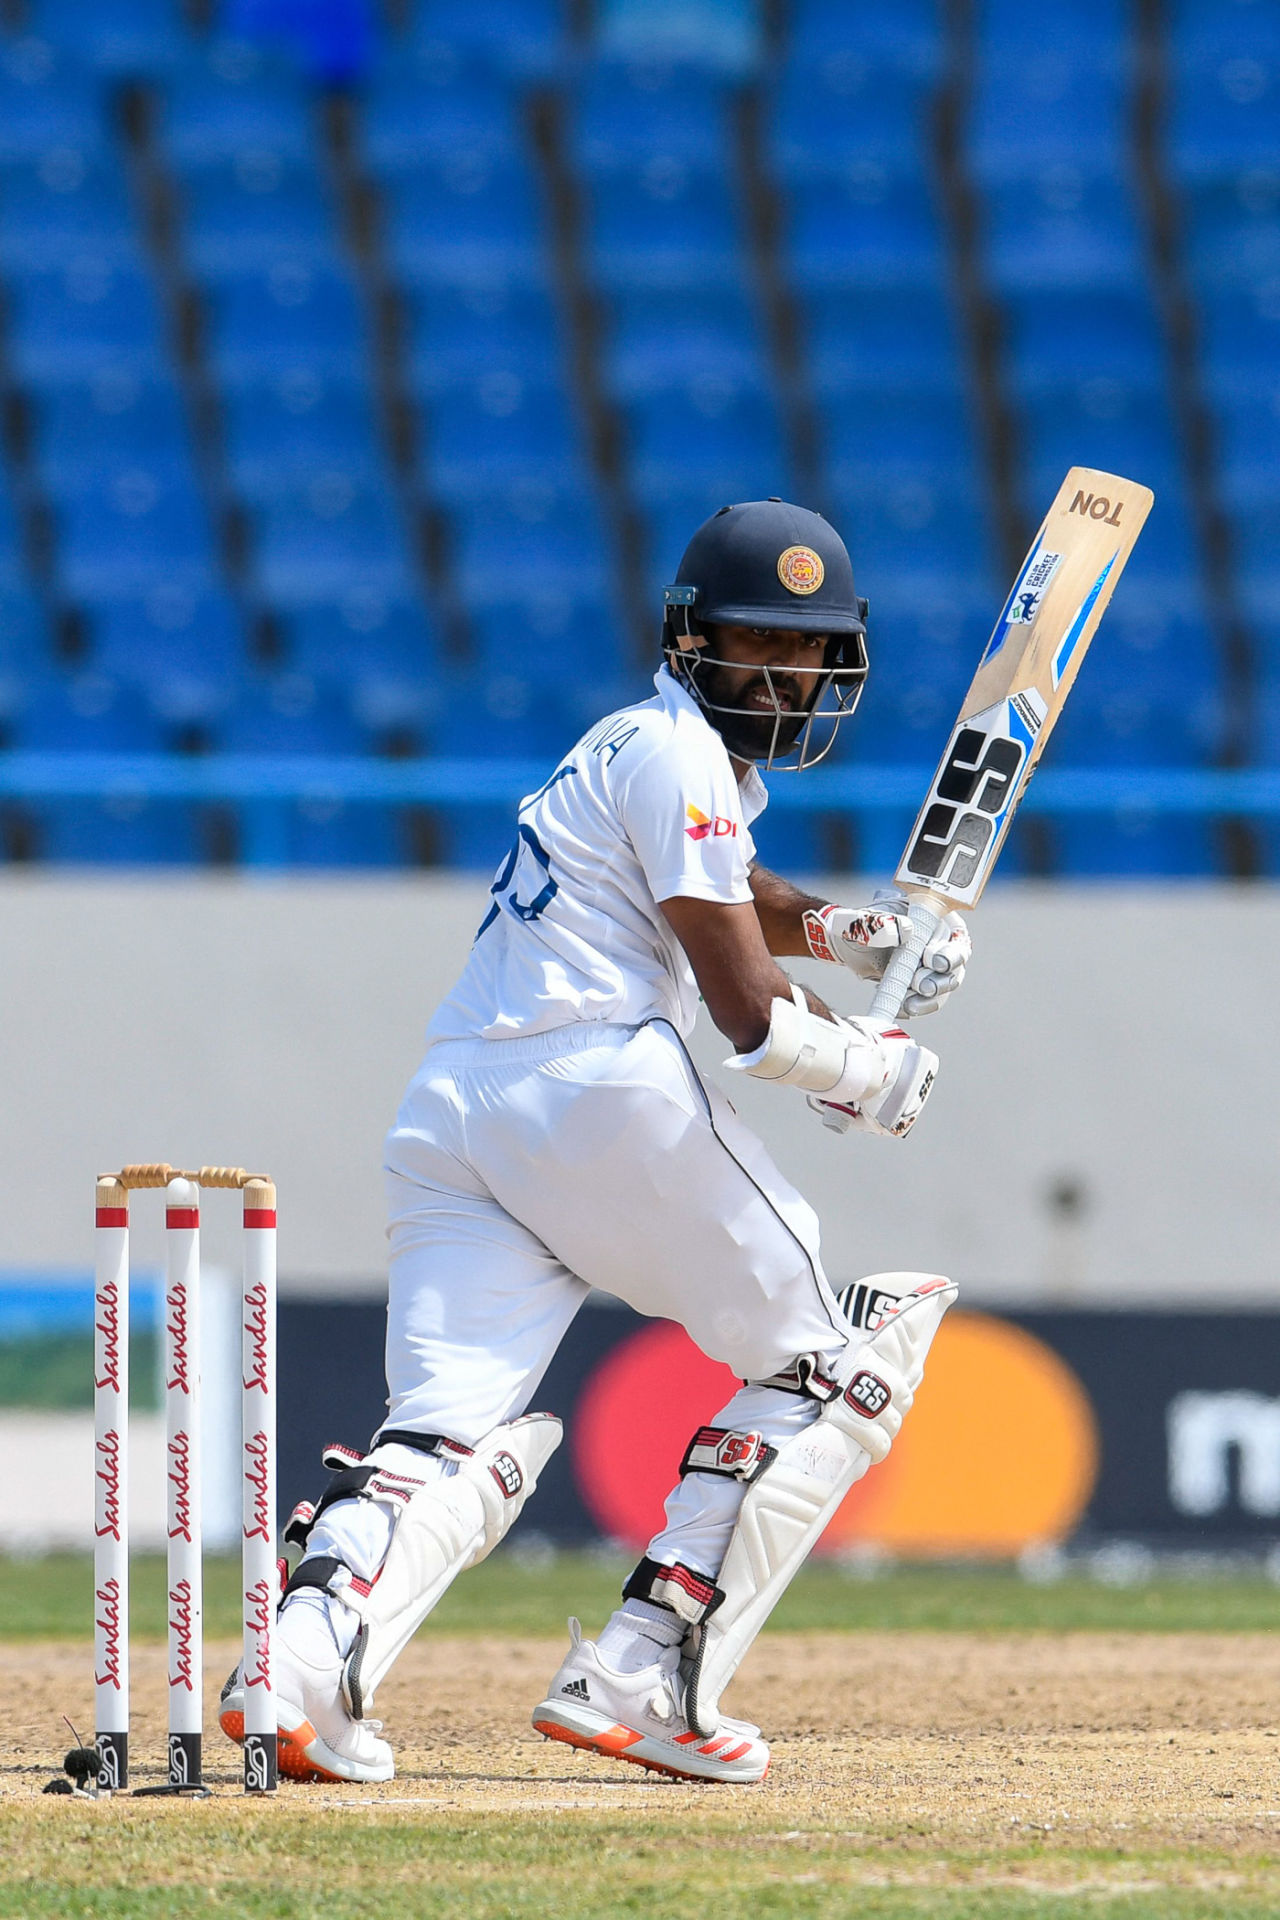 Lahiru Thirimanne flicks a boundary behind square on his way to a half-century, West Indies vs Sri Lanka, 2nd Test, 2nd Day, North Sound, March 30, 2021